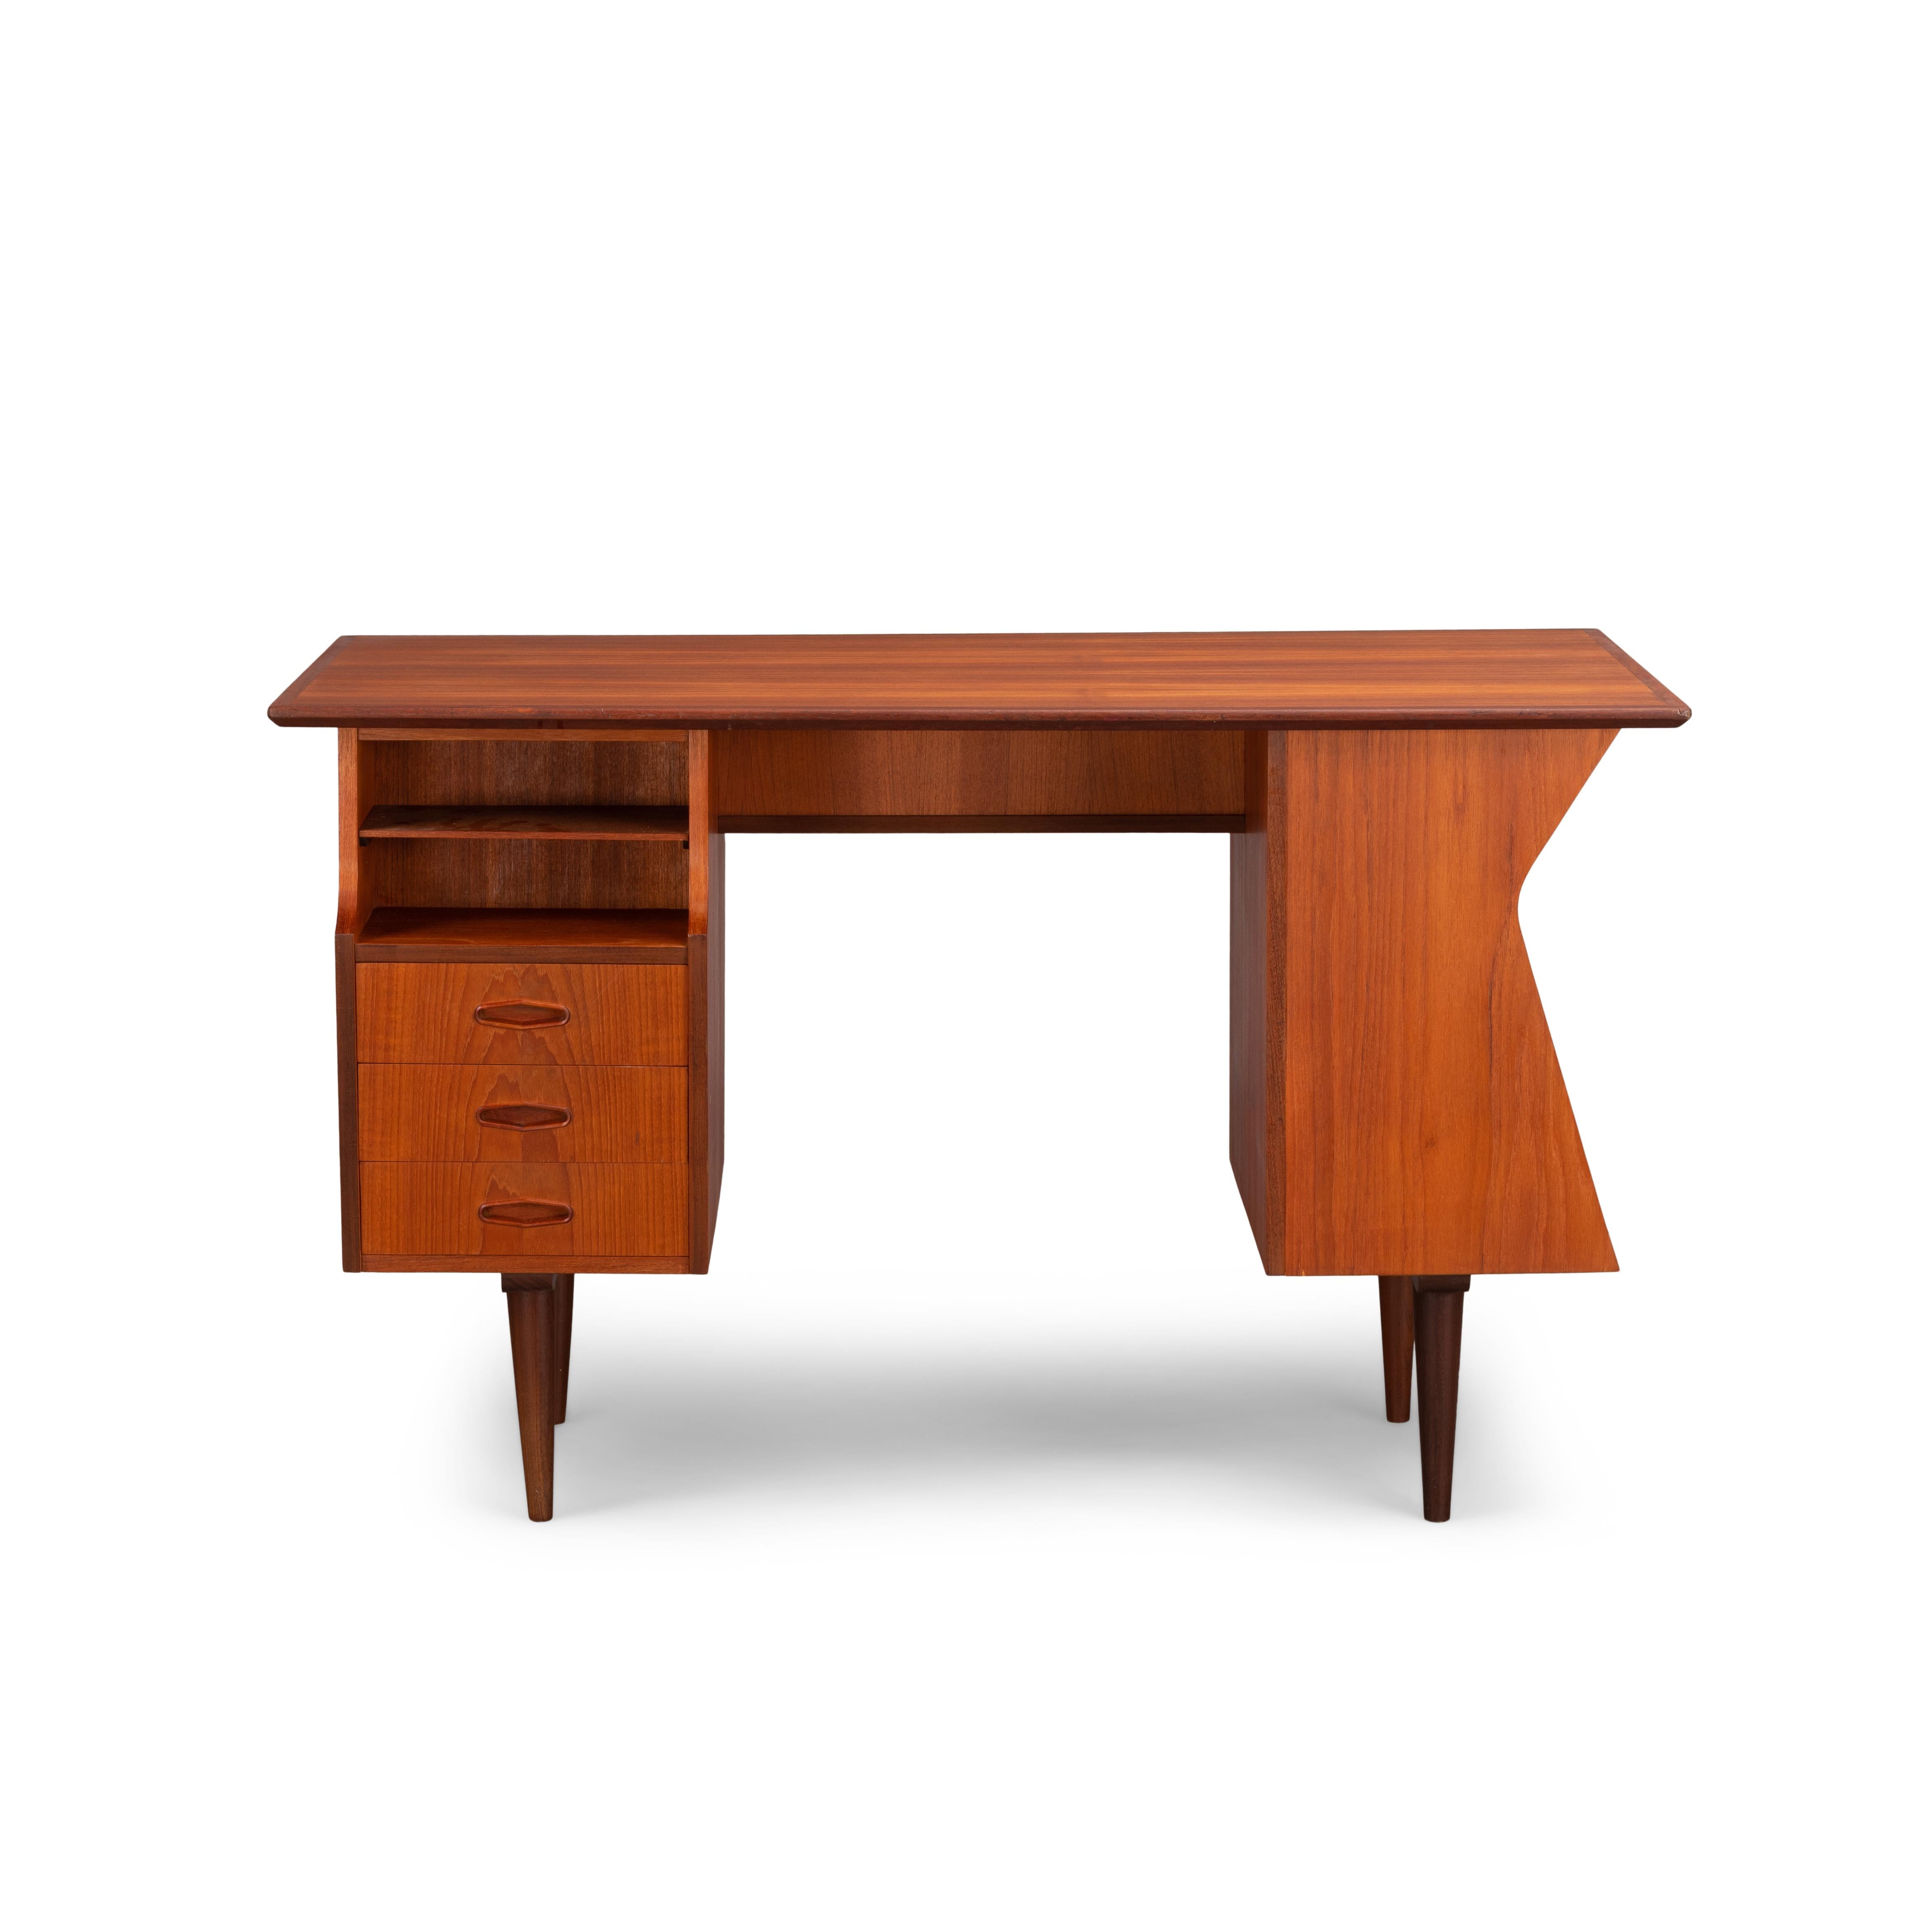 This Danish midcentury rare teak writing desk has been produced during the 1960s. It is made of teak with sculptural shape and handles. The desk features different storage possibilities with a total of five drawers. This bureau can be placed free